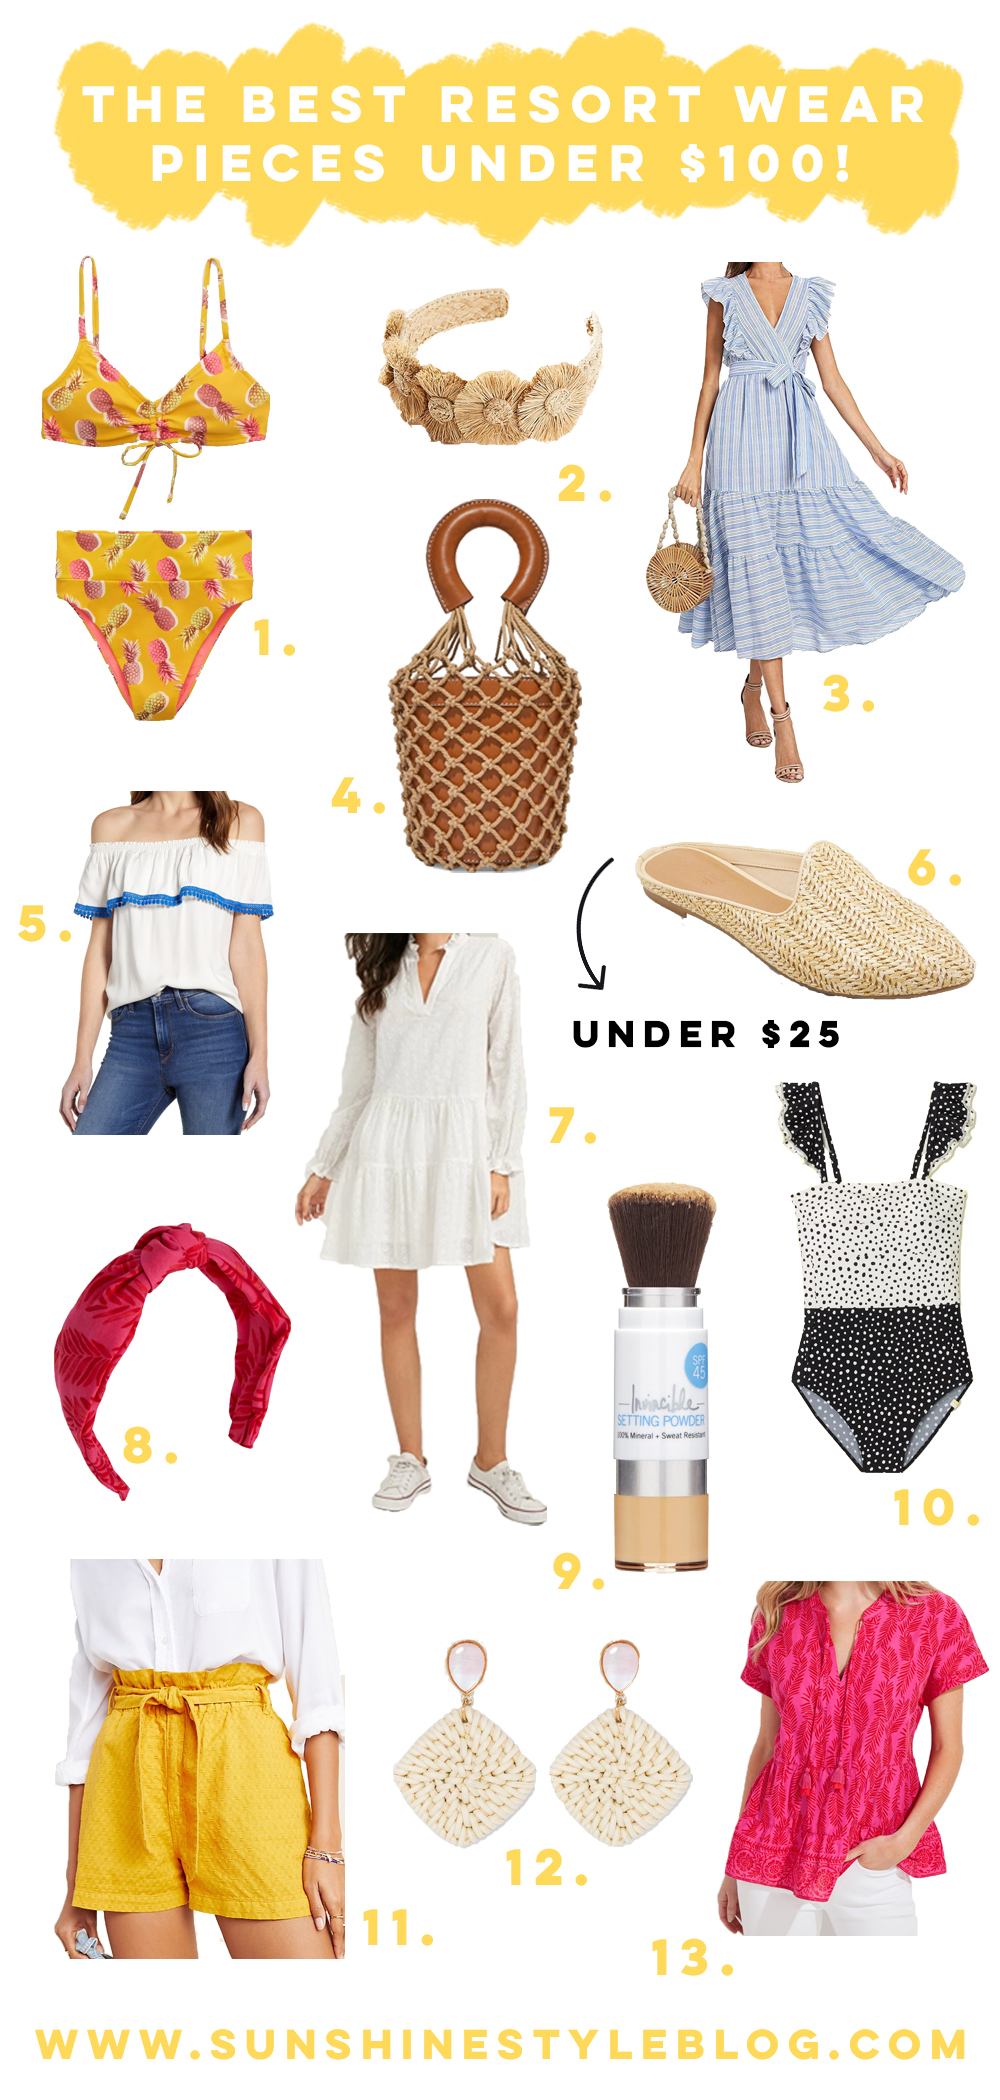 Resort Wear Pieces Under $100 / What to Wear for Spring Break / What to Wear on a Beach Vacation / Warm Weather Getaway / Resort Wear 2020 / Amazon Dress / Raffia Accessories / Straw Bag / Beach Cover Up / Florida Fashion Finds / What to Wear in March in Florida - Sunshine Style, A Florida Based Fashion Blog by Katie McCarty